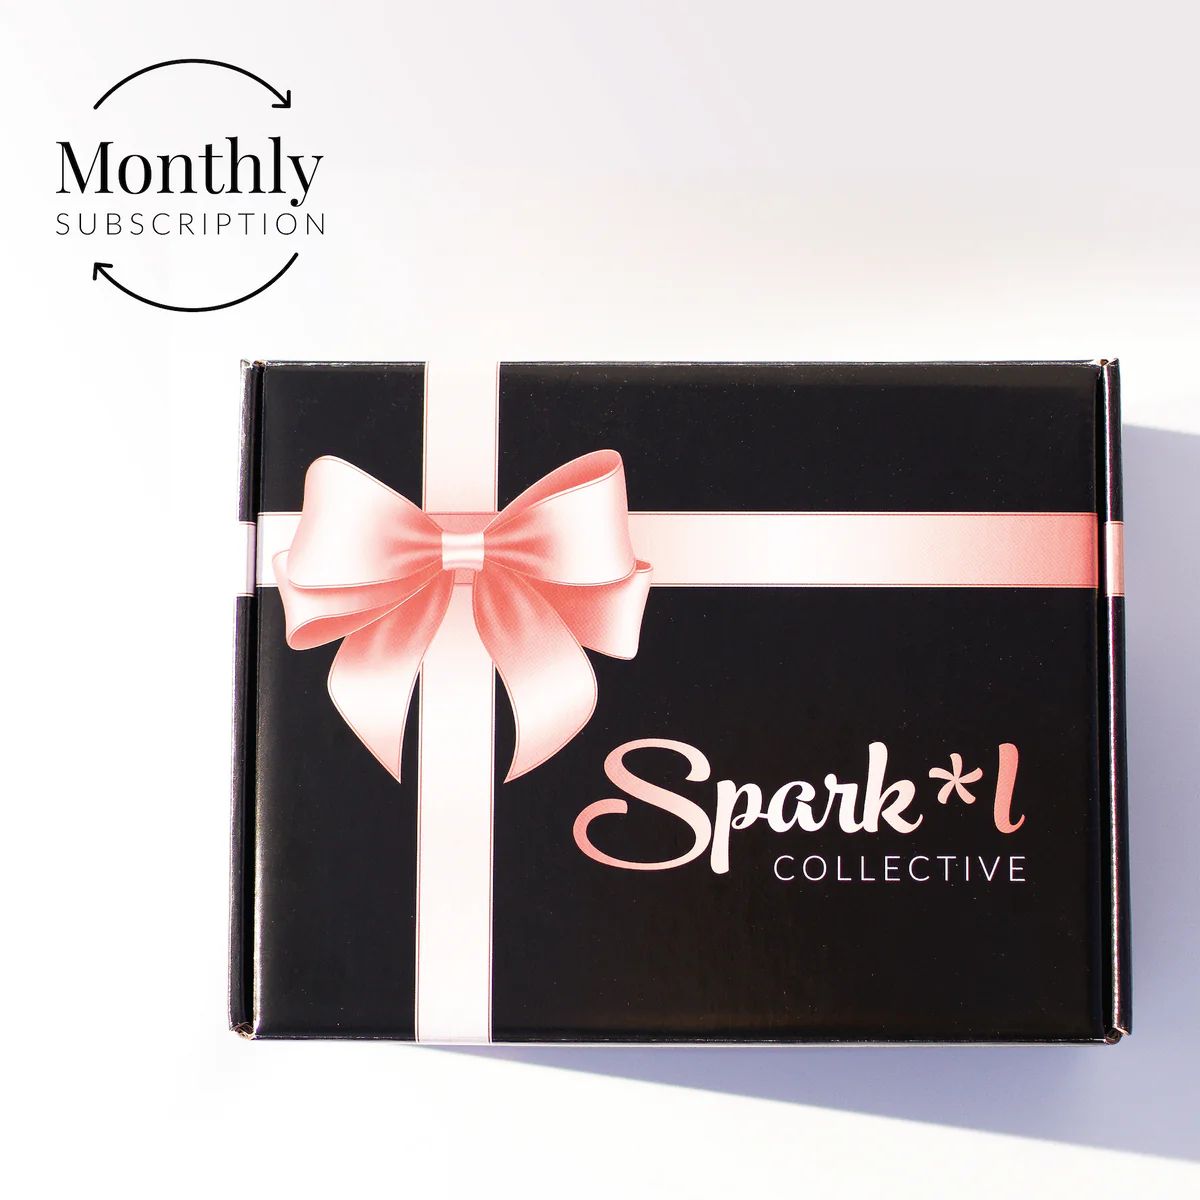 Monthly Box | Spark*l